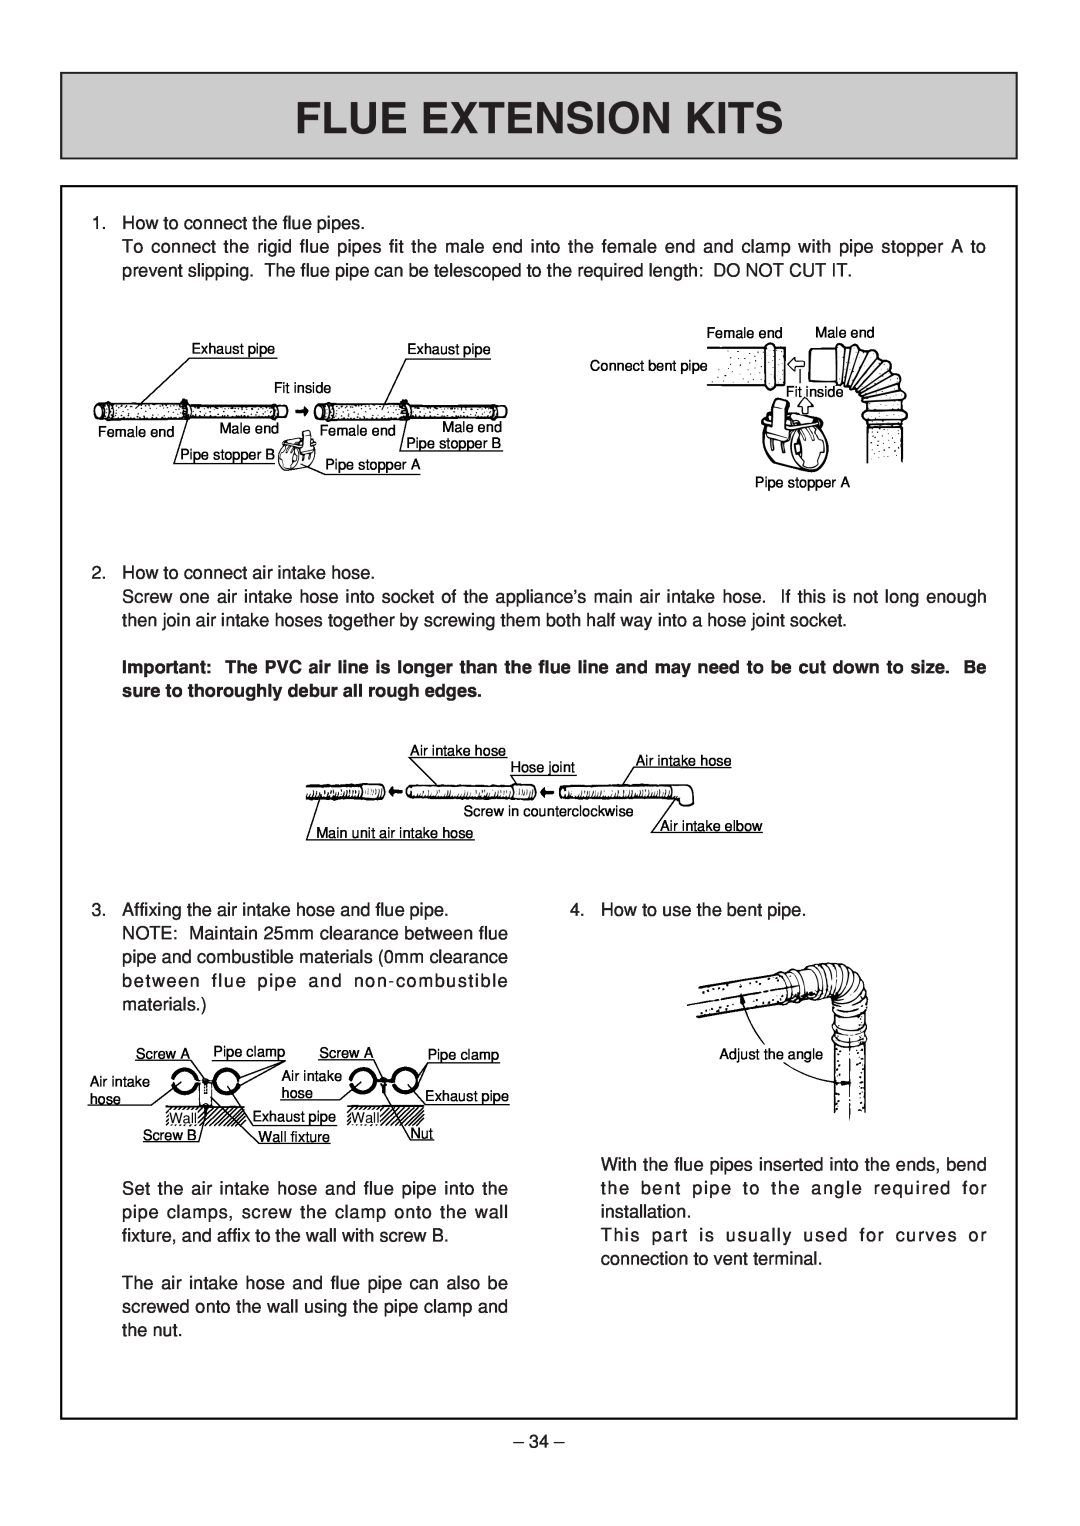 Rinnai RHFE-308 FTR user manual Flue Extension Kits, How to connect the flue pipes 